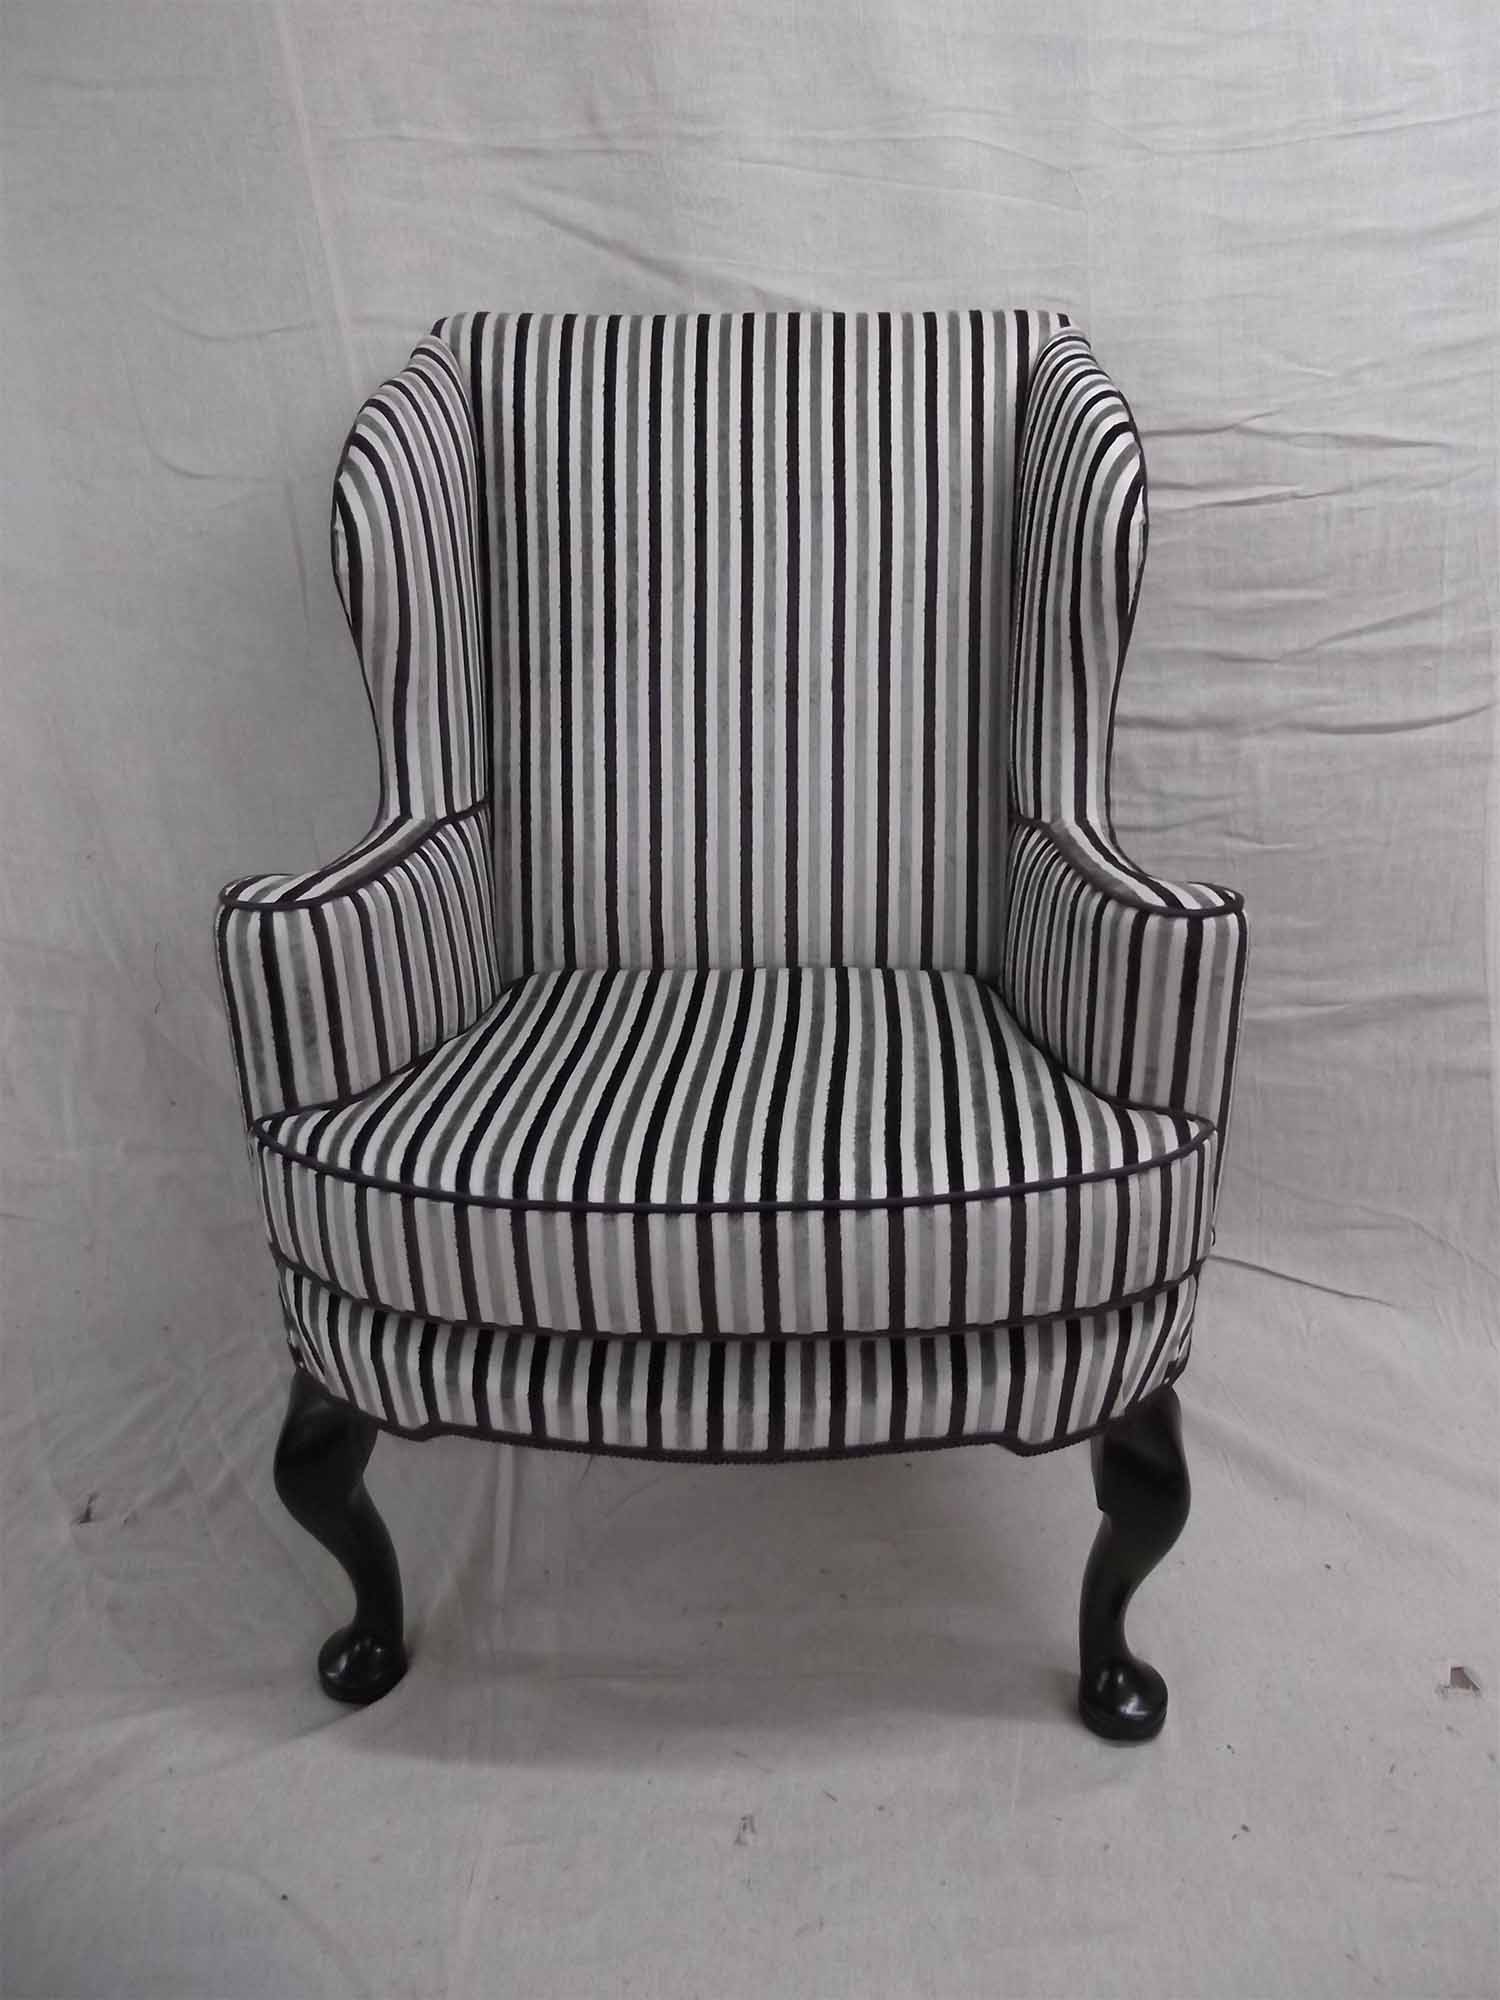 striped chair with new upholstery fabric